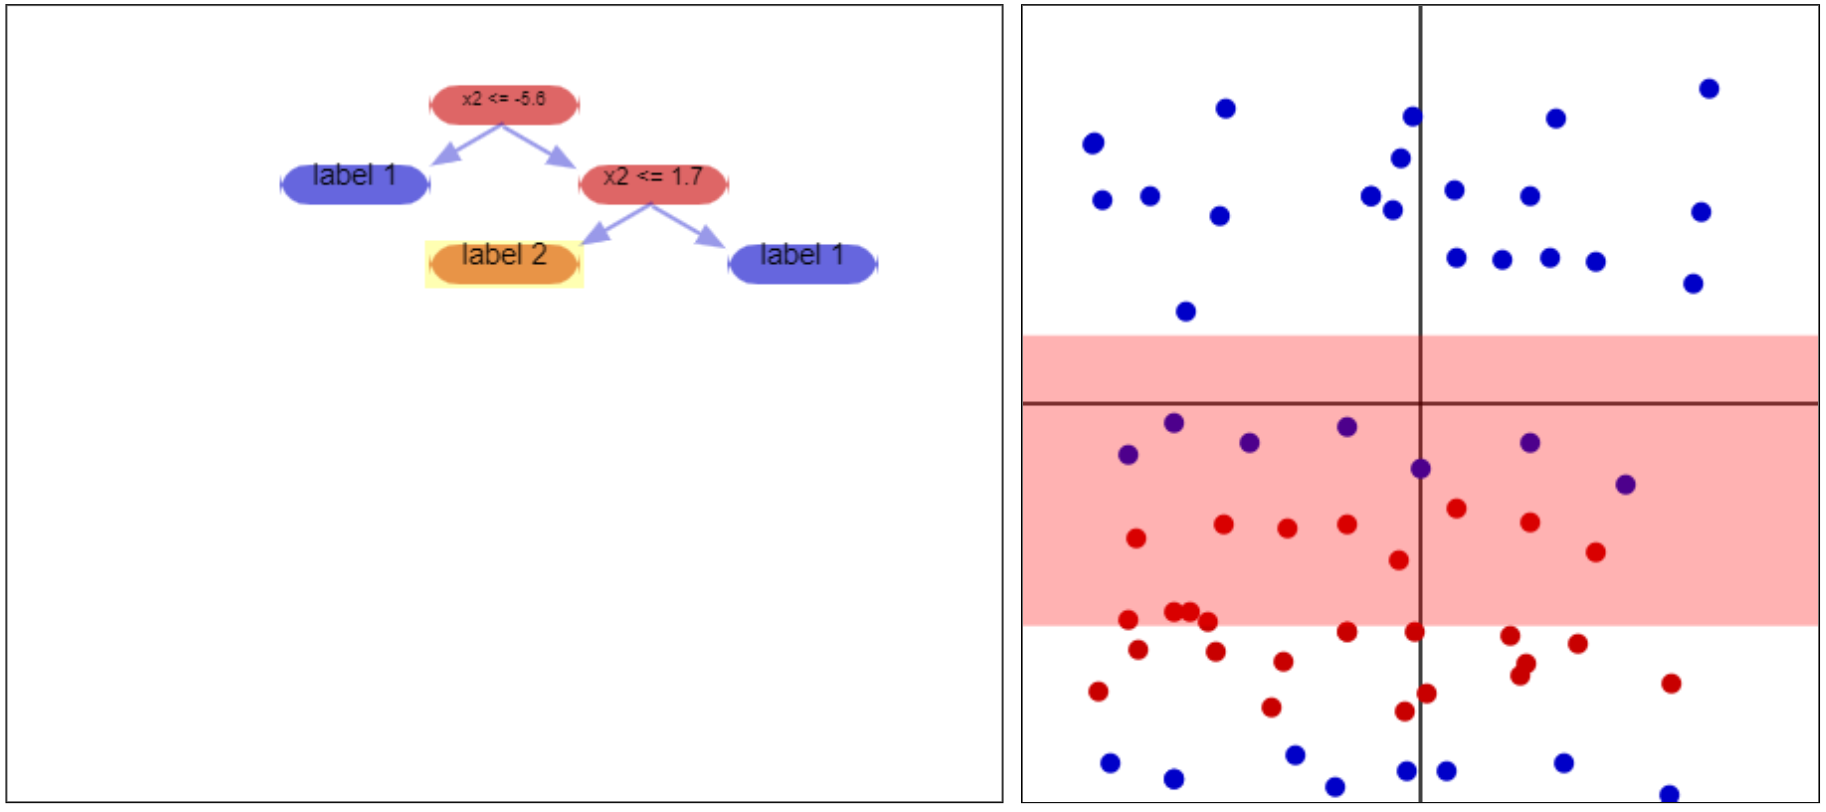 Impure partition example. The final node puts red and blue dots together